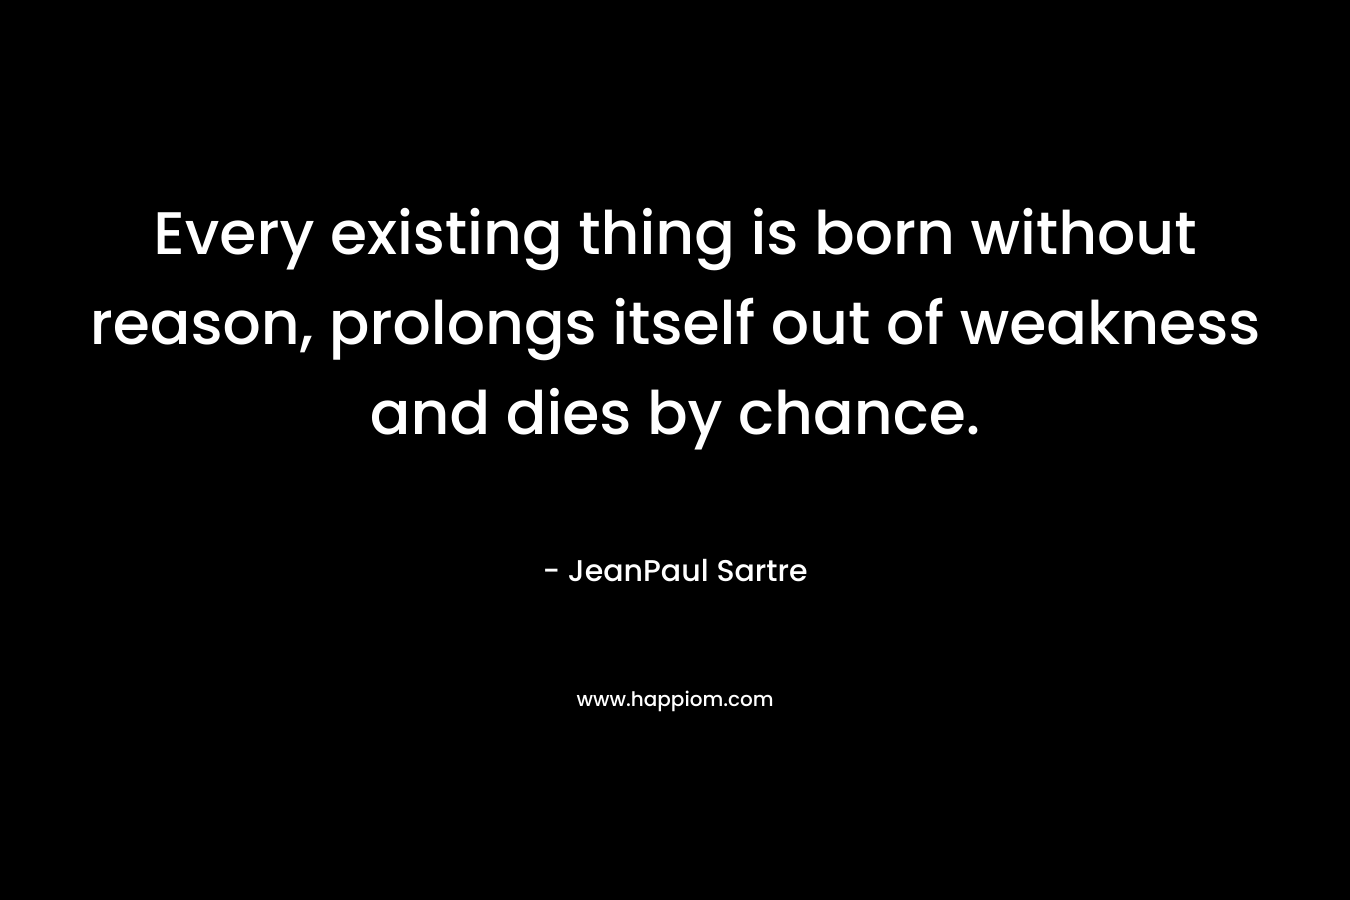 Every existing thing is born without reason, prolongs itself out of weakness and dies by chance. – JeanPaul Sartre